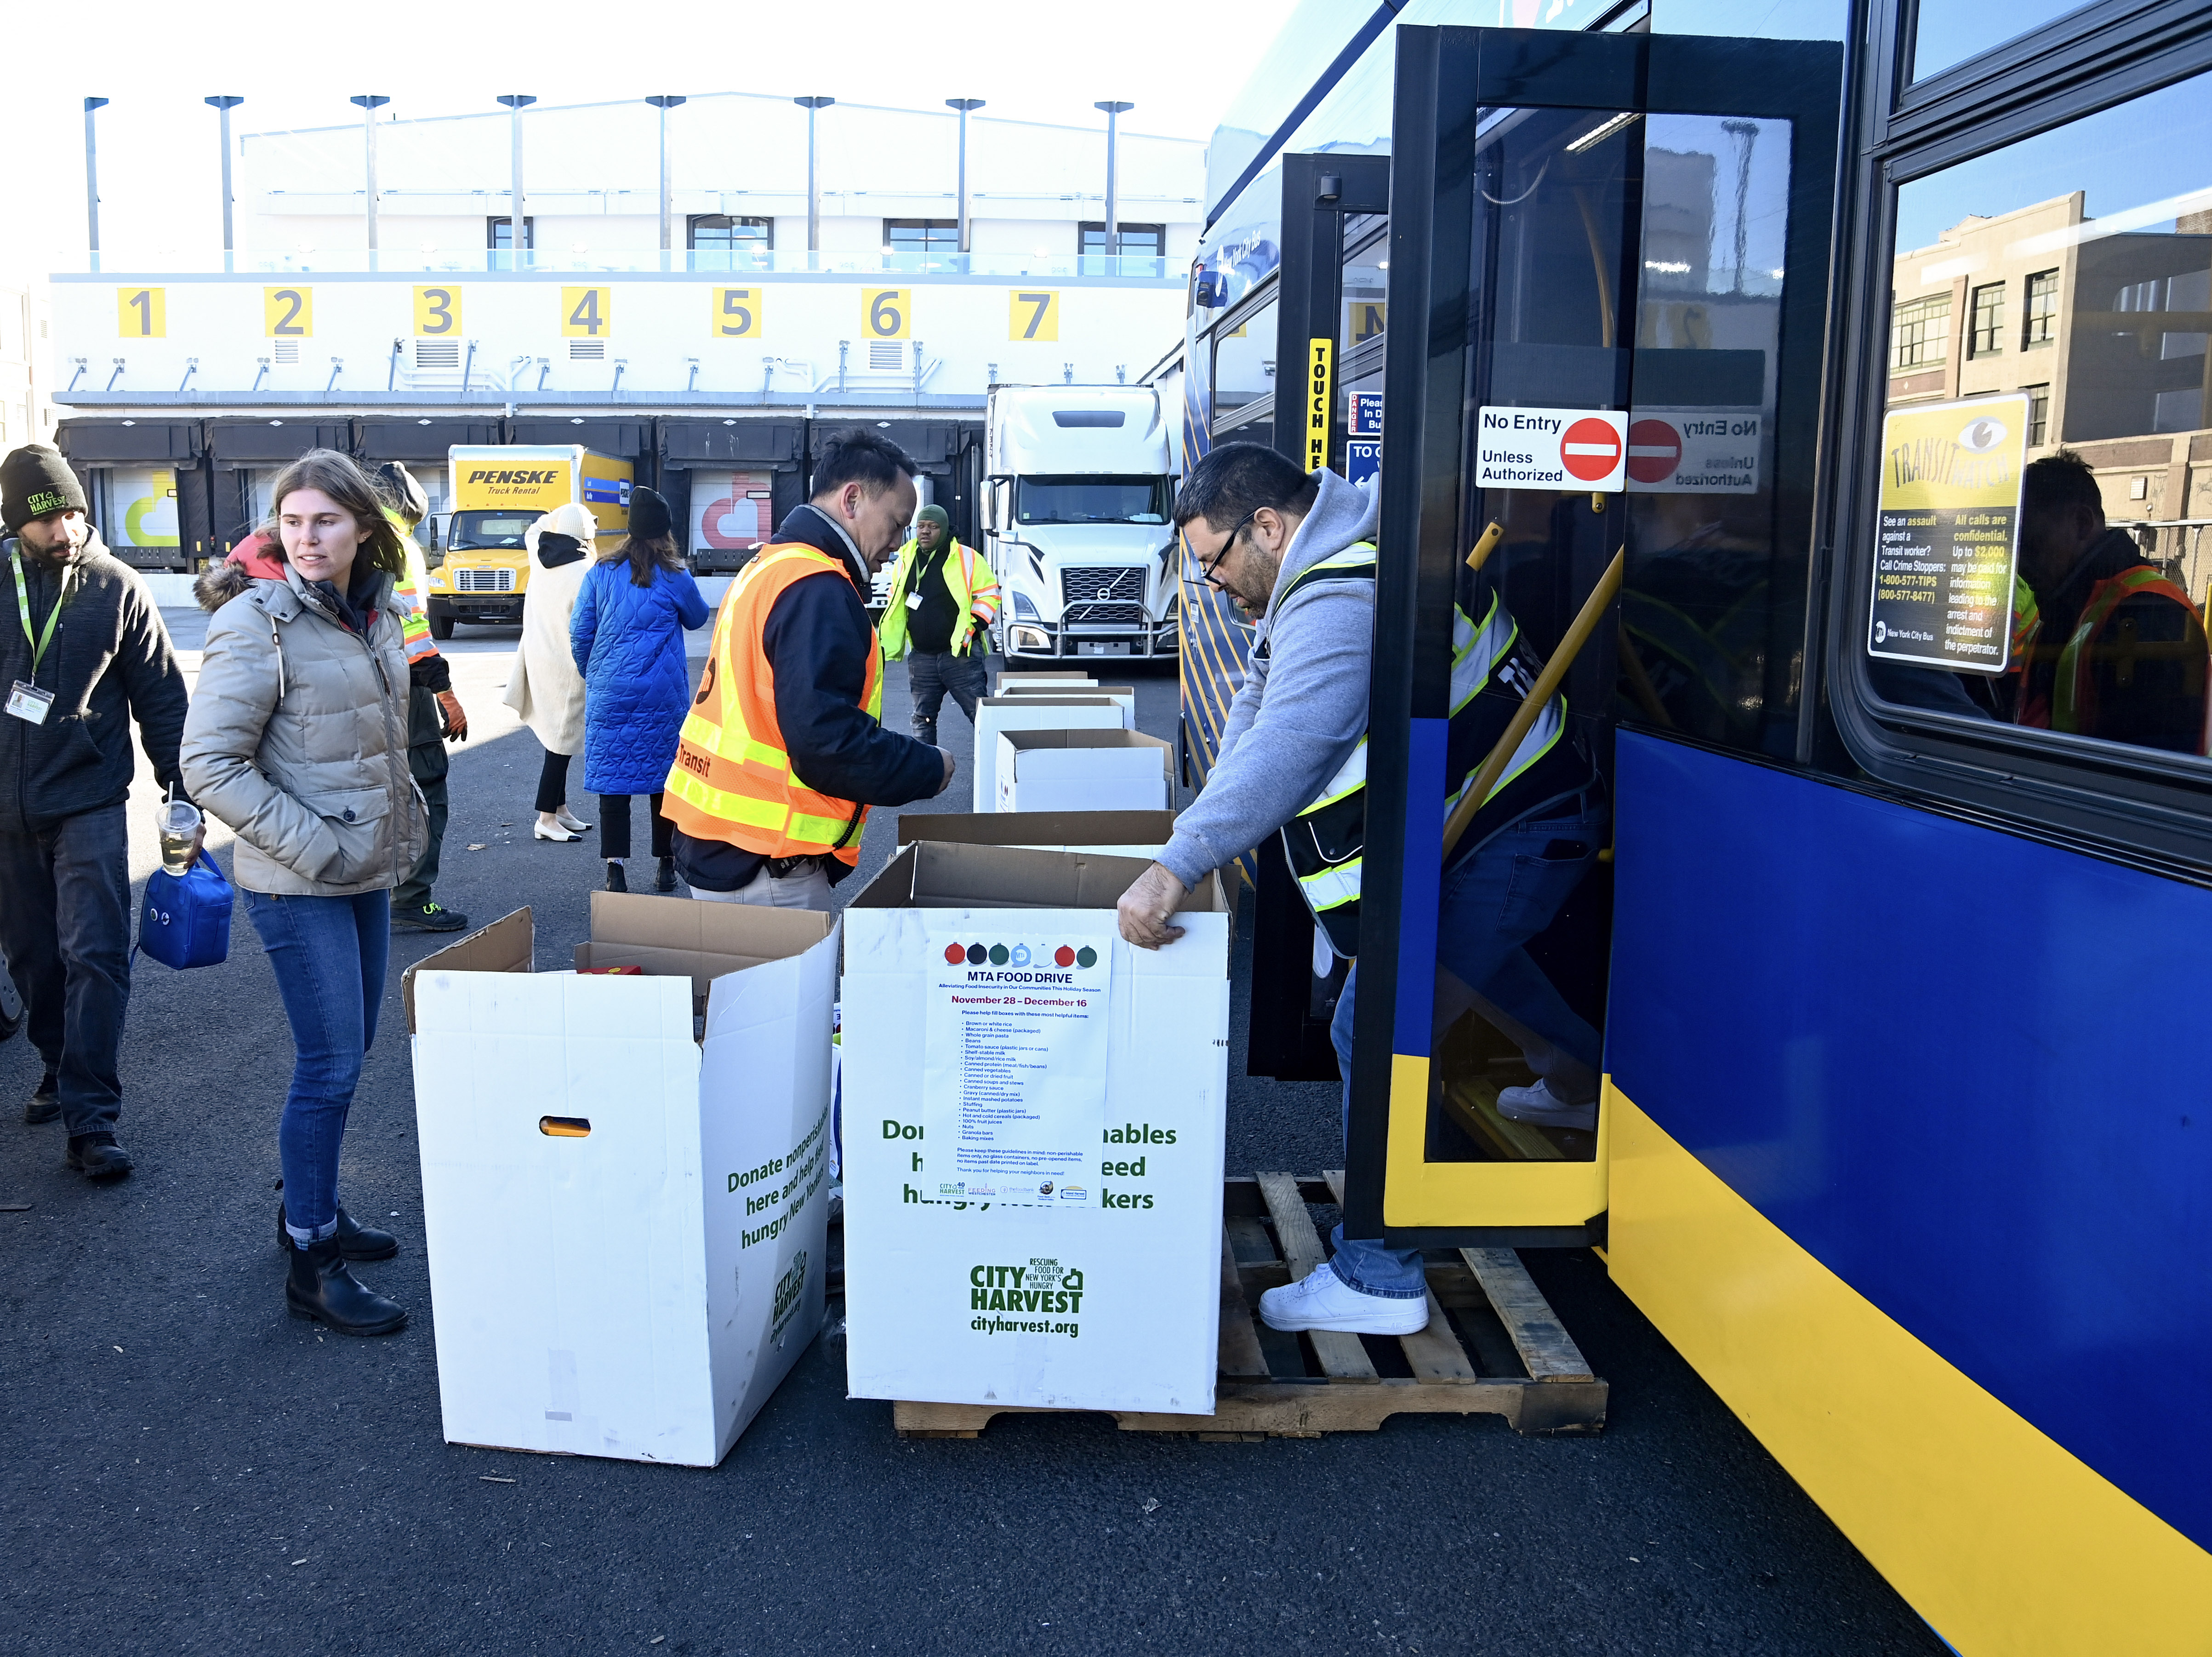 A bus makes a delivery to the City Harvest Cohen Community Food Resource Center in Brooklyn on Tuesday, Dec 20, 2022, the result of an MTA facility food drive.